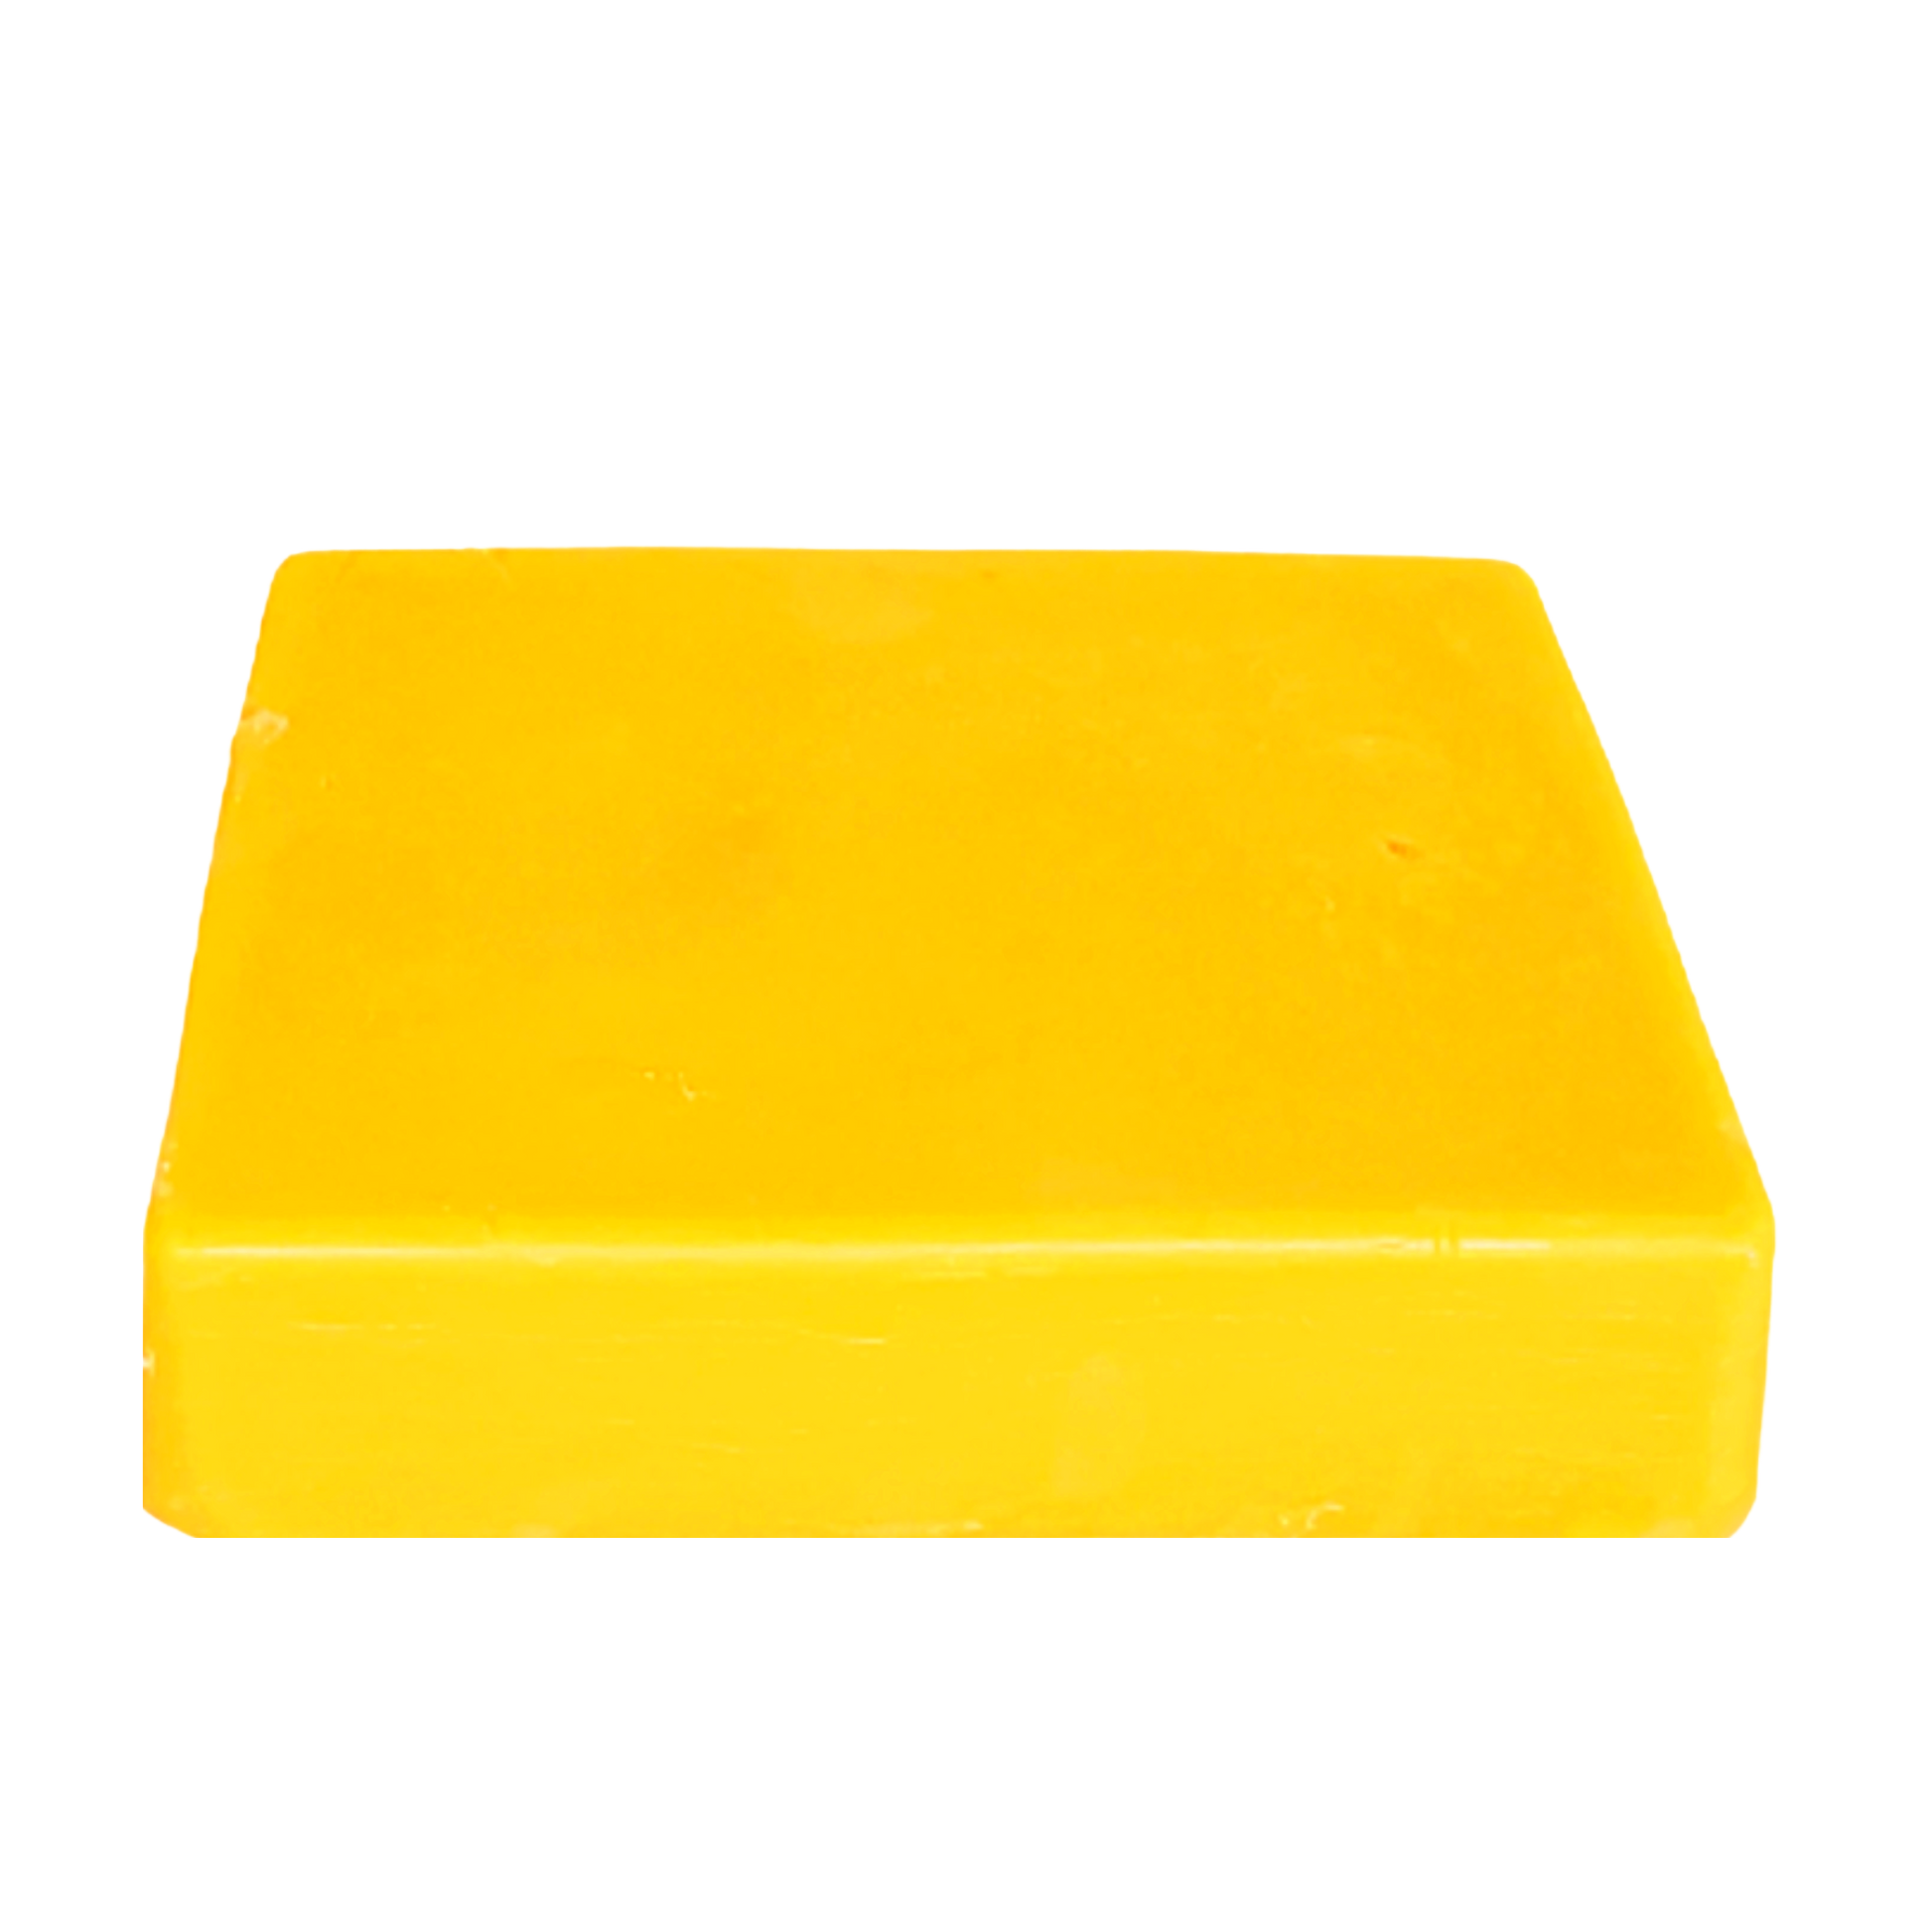 Virgin Beeswax For Sale  Bulk Beeswax Available – BeeswaxFromBeekeepers